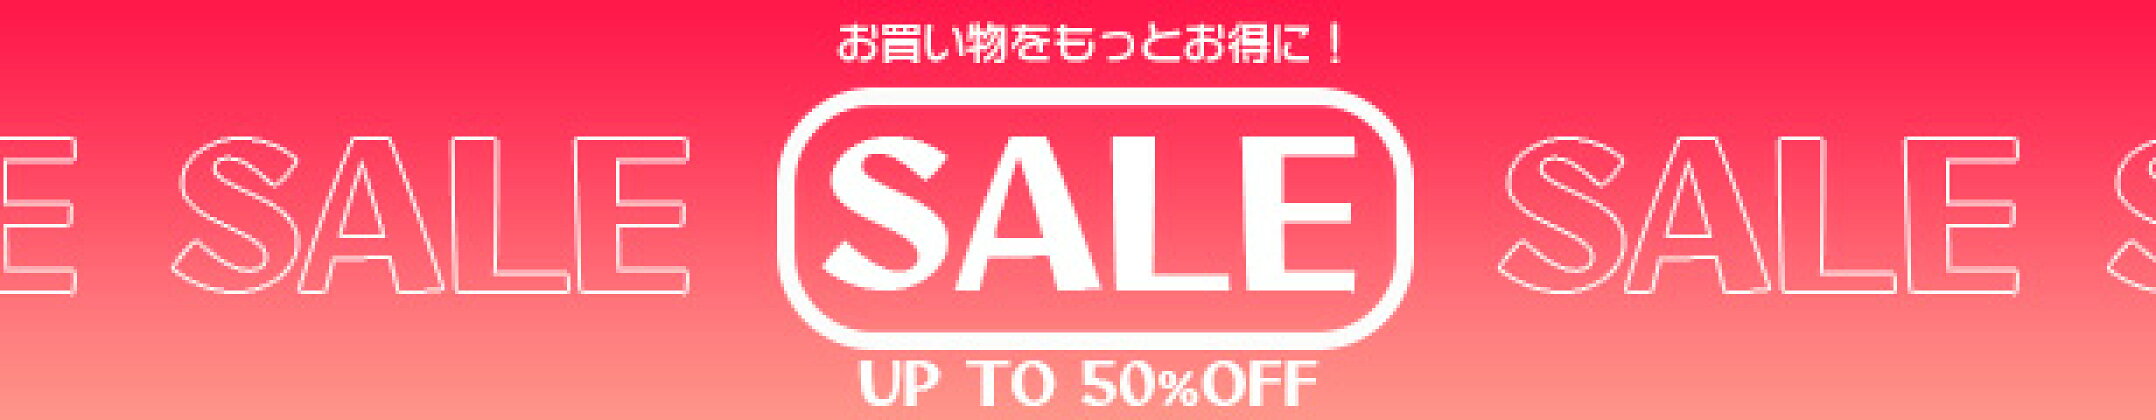 SALE-UP TO 50%OFF